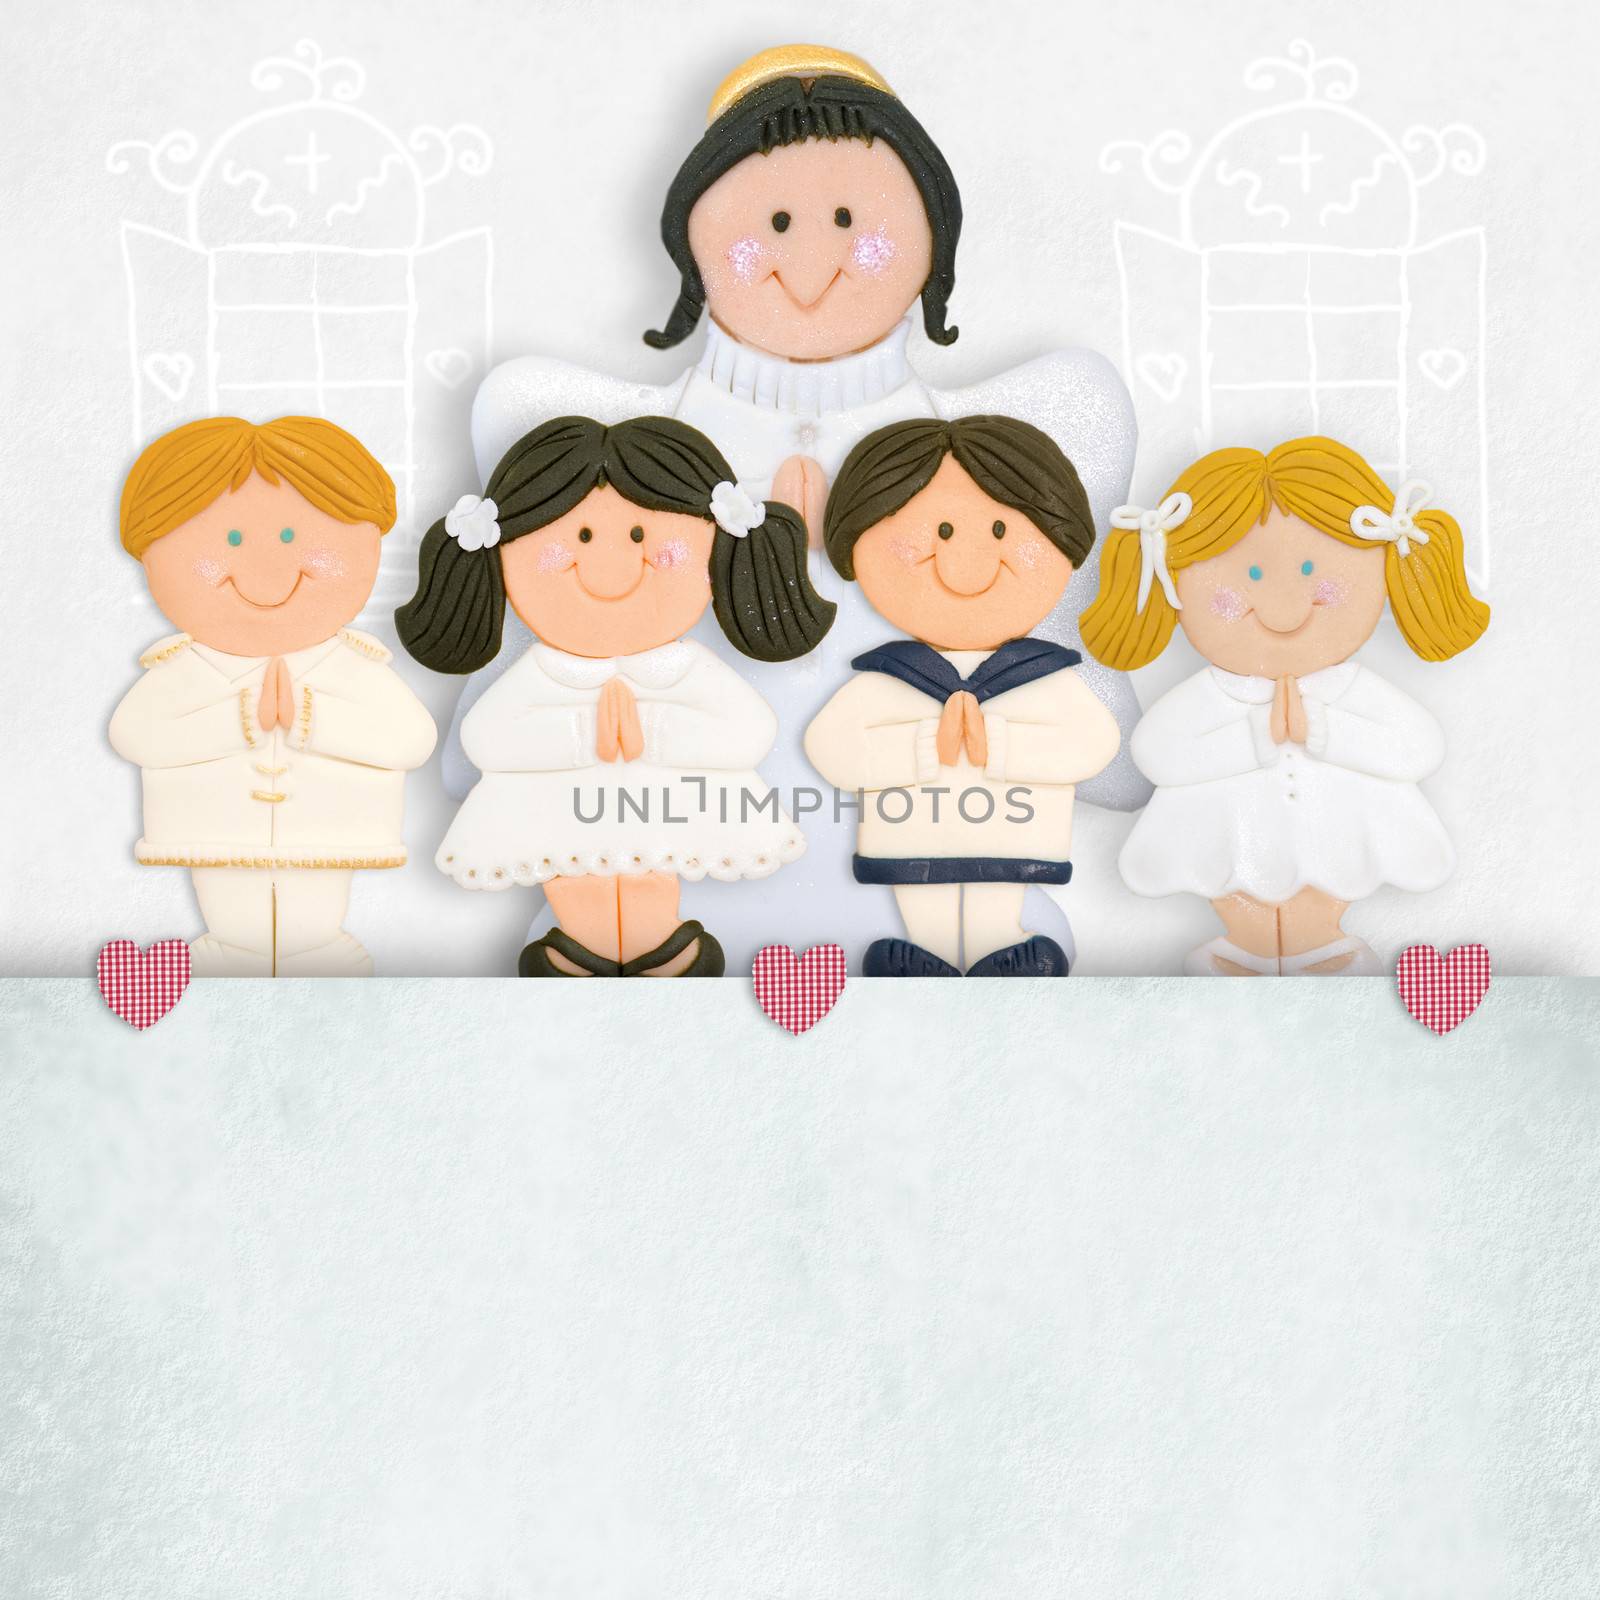 first communion invitation angel and children in the church with empty space to fill with name and place